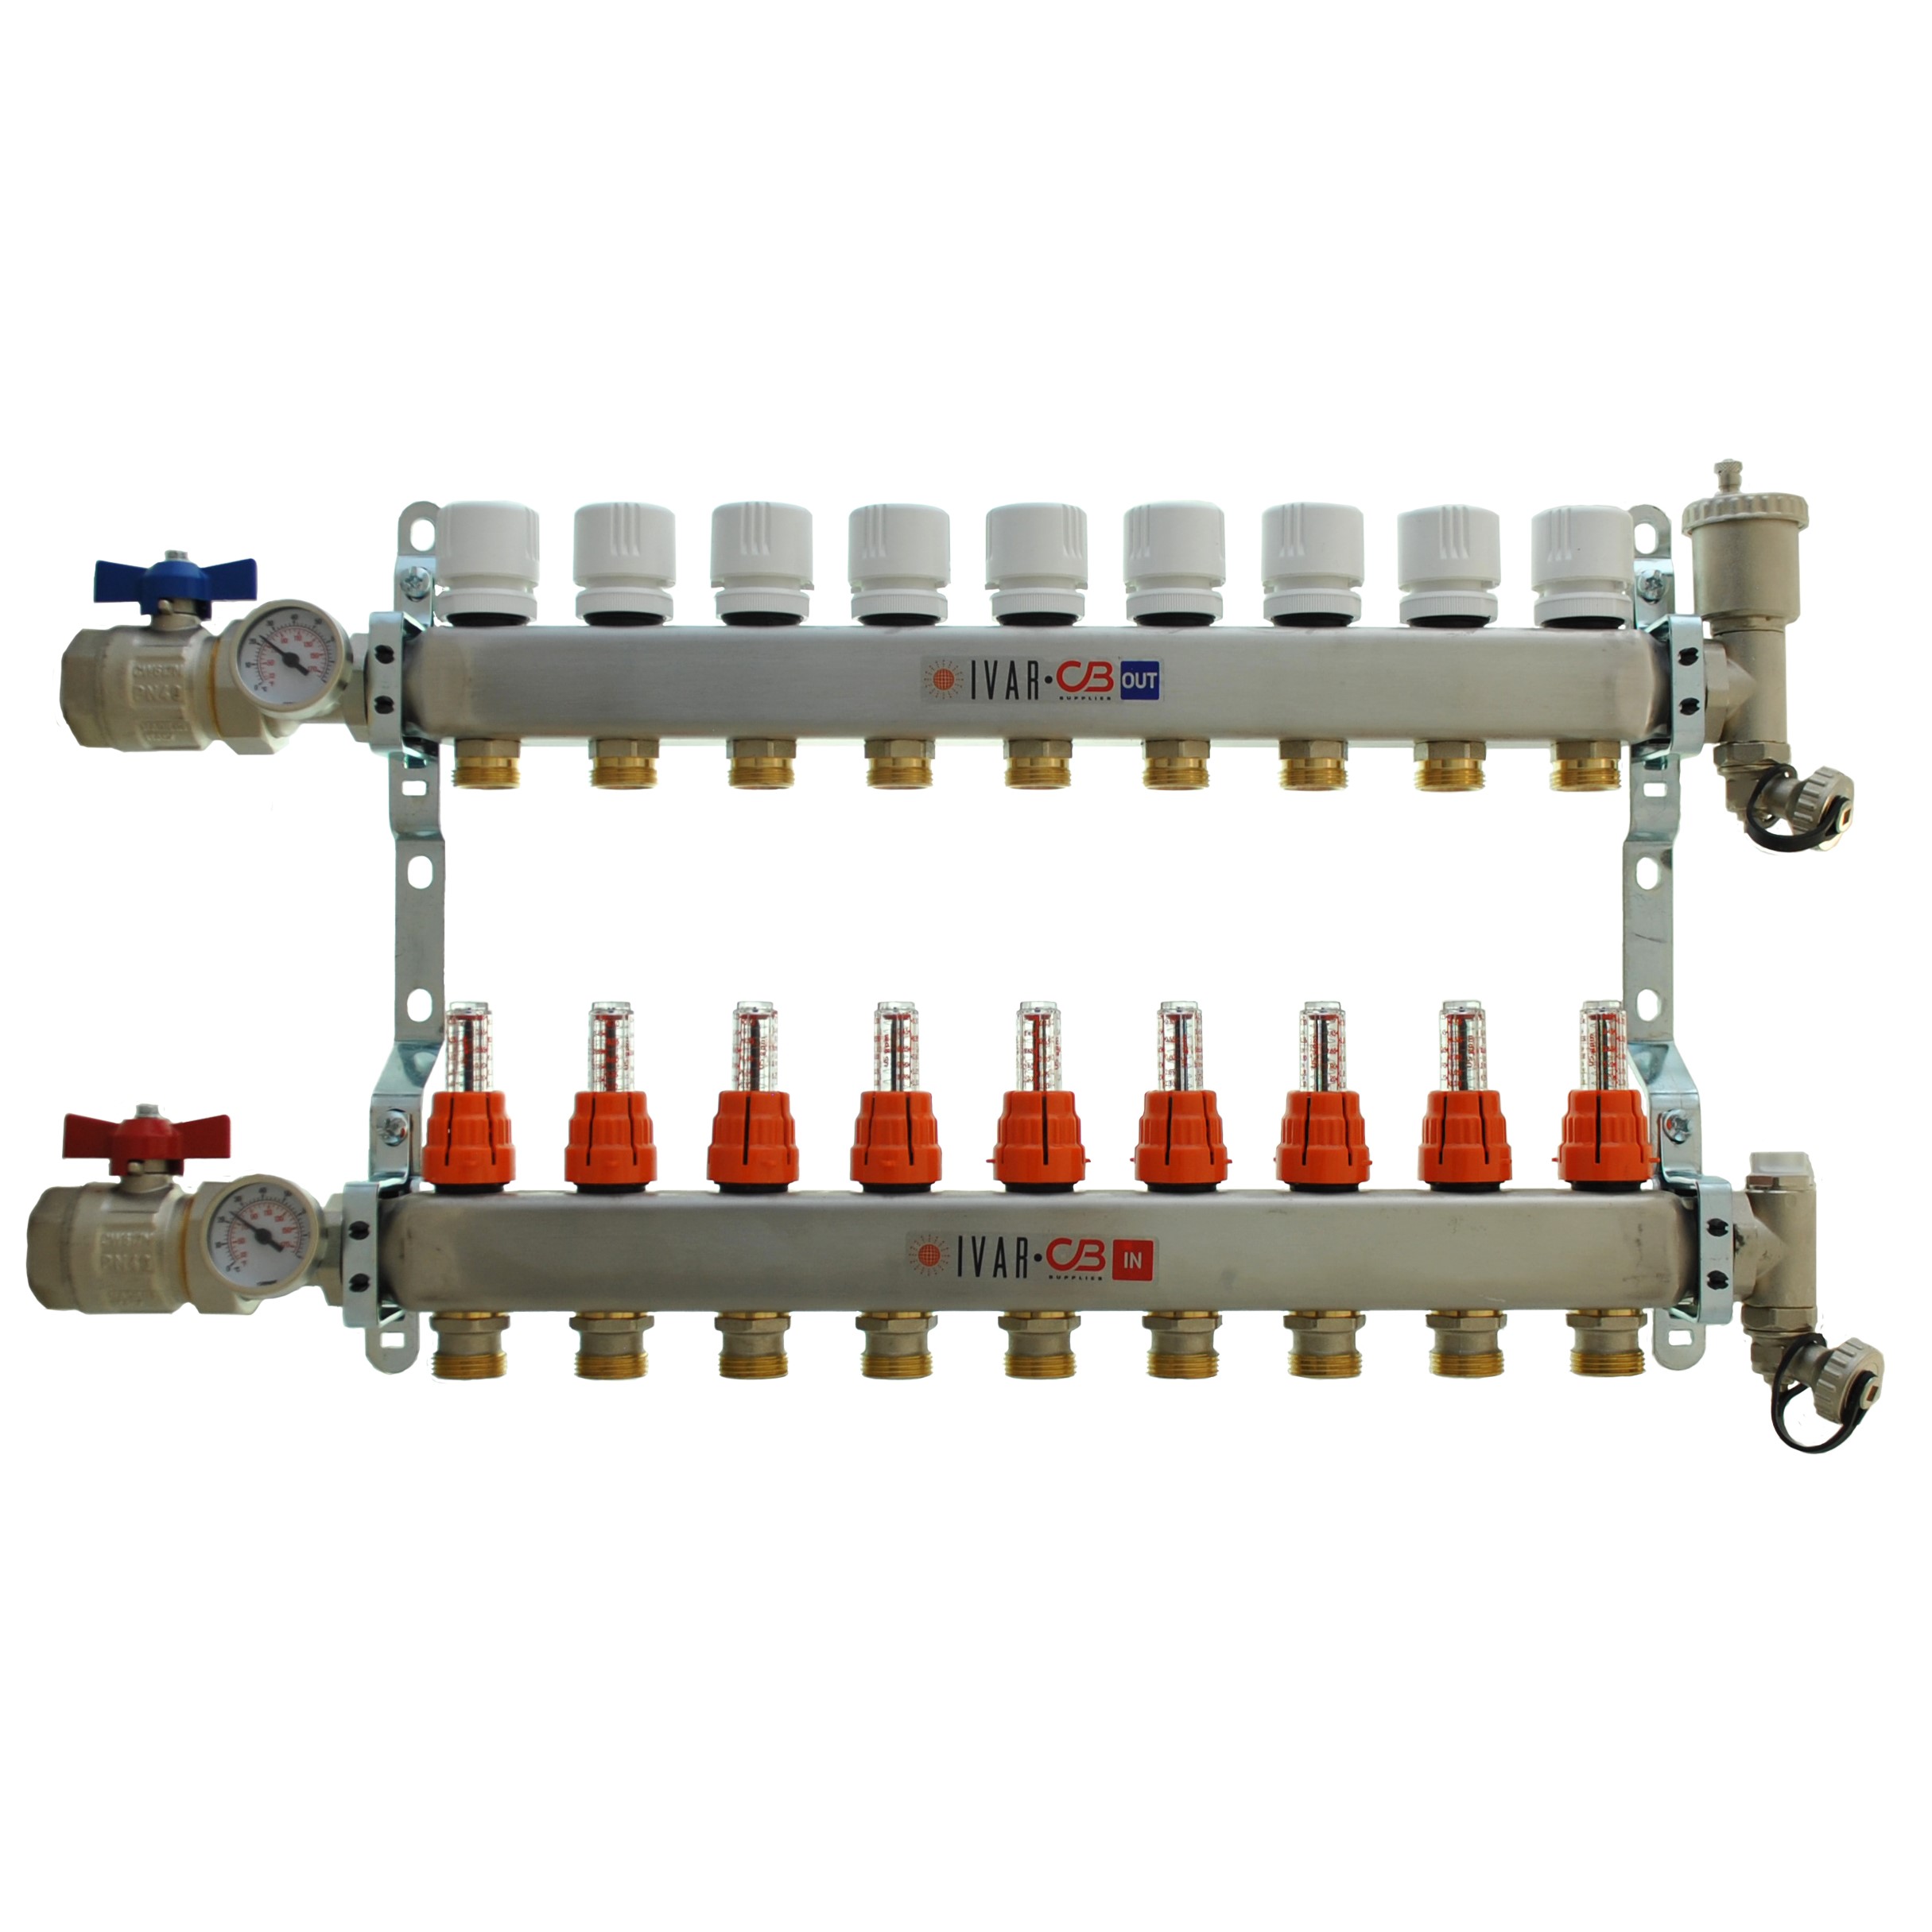 1\" IVAR Stainless Steel Hydronic Manifold for Radiant Floor Heating - 9 ports